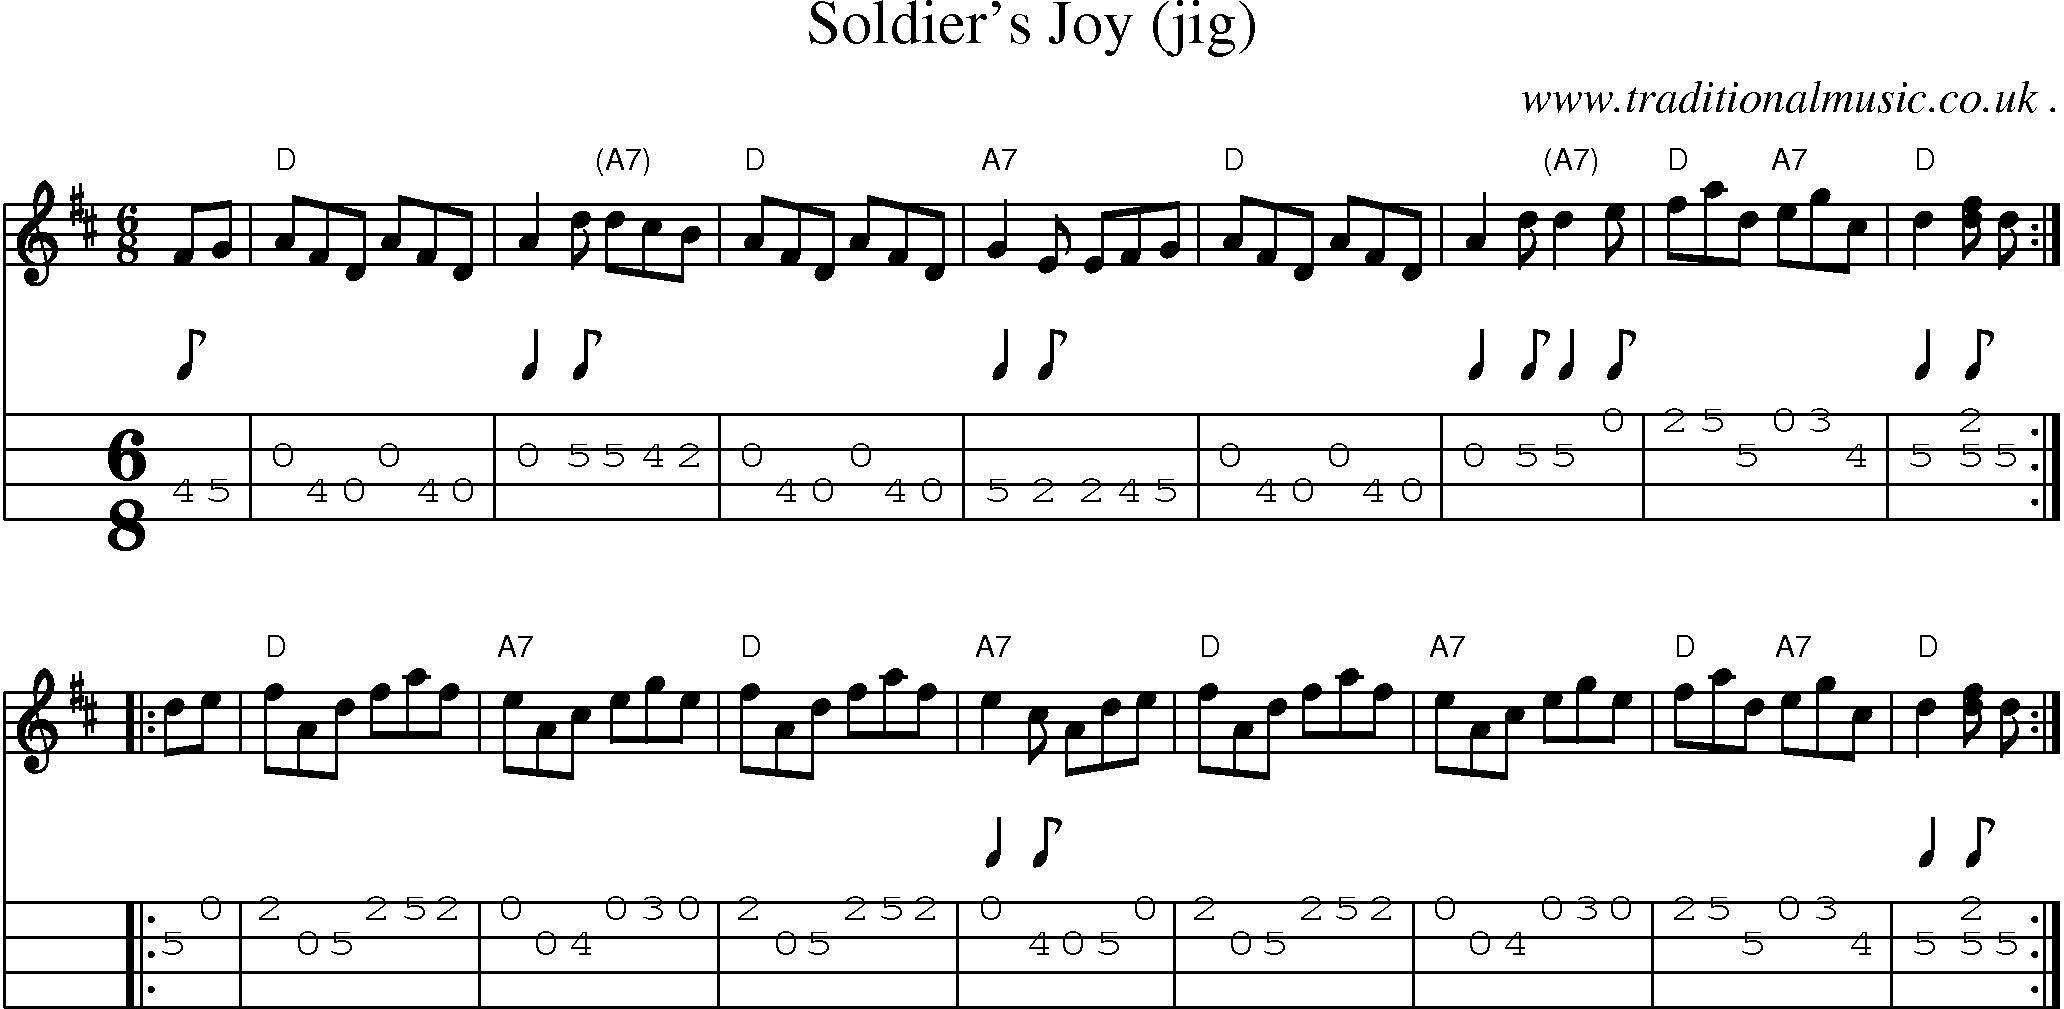 Sheet-music  score, Chords and Mandolin Tabs for Soldiers Joy Jig